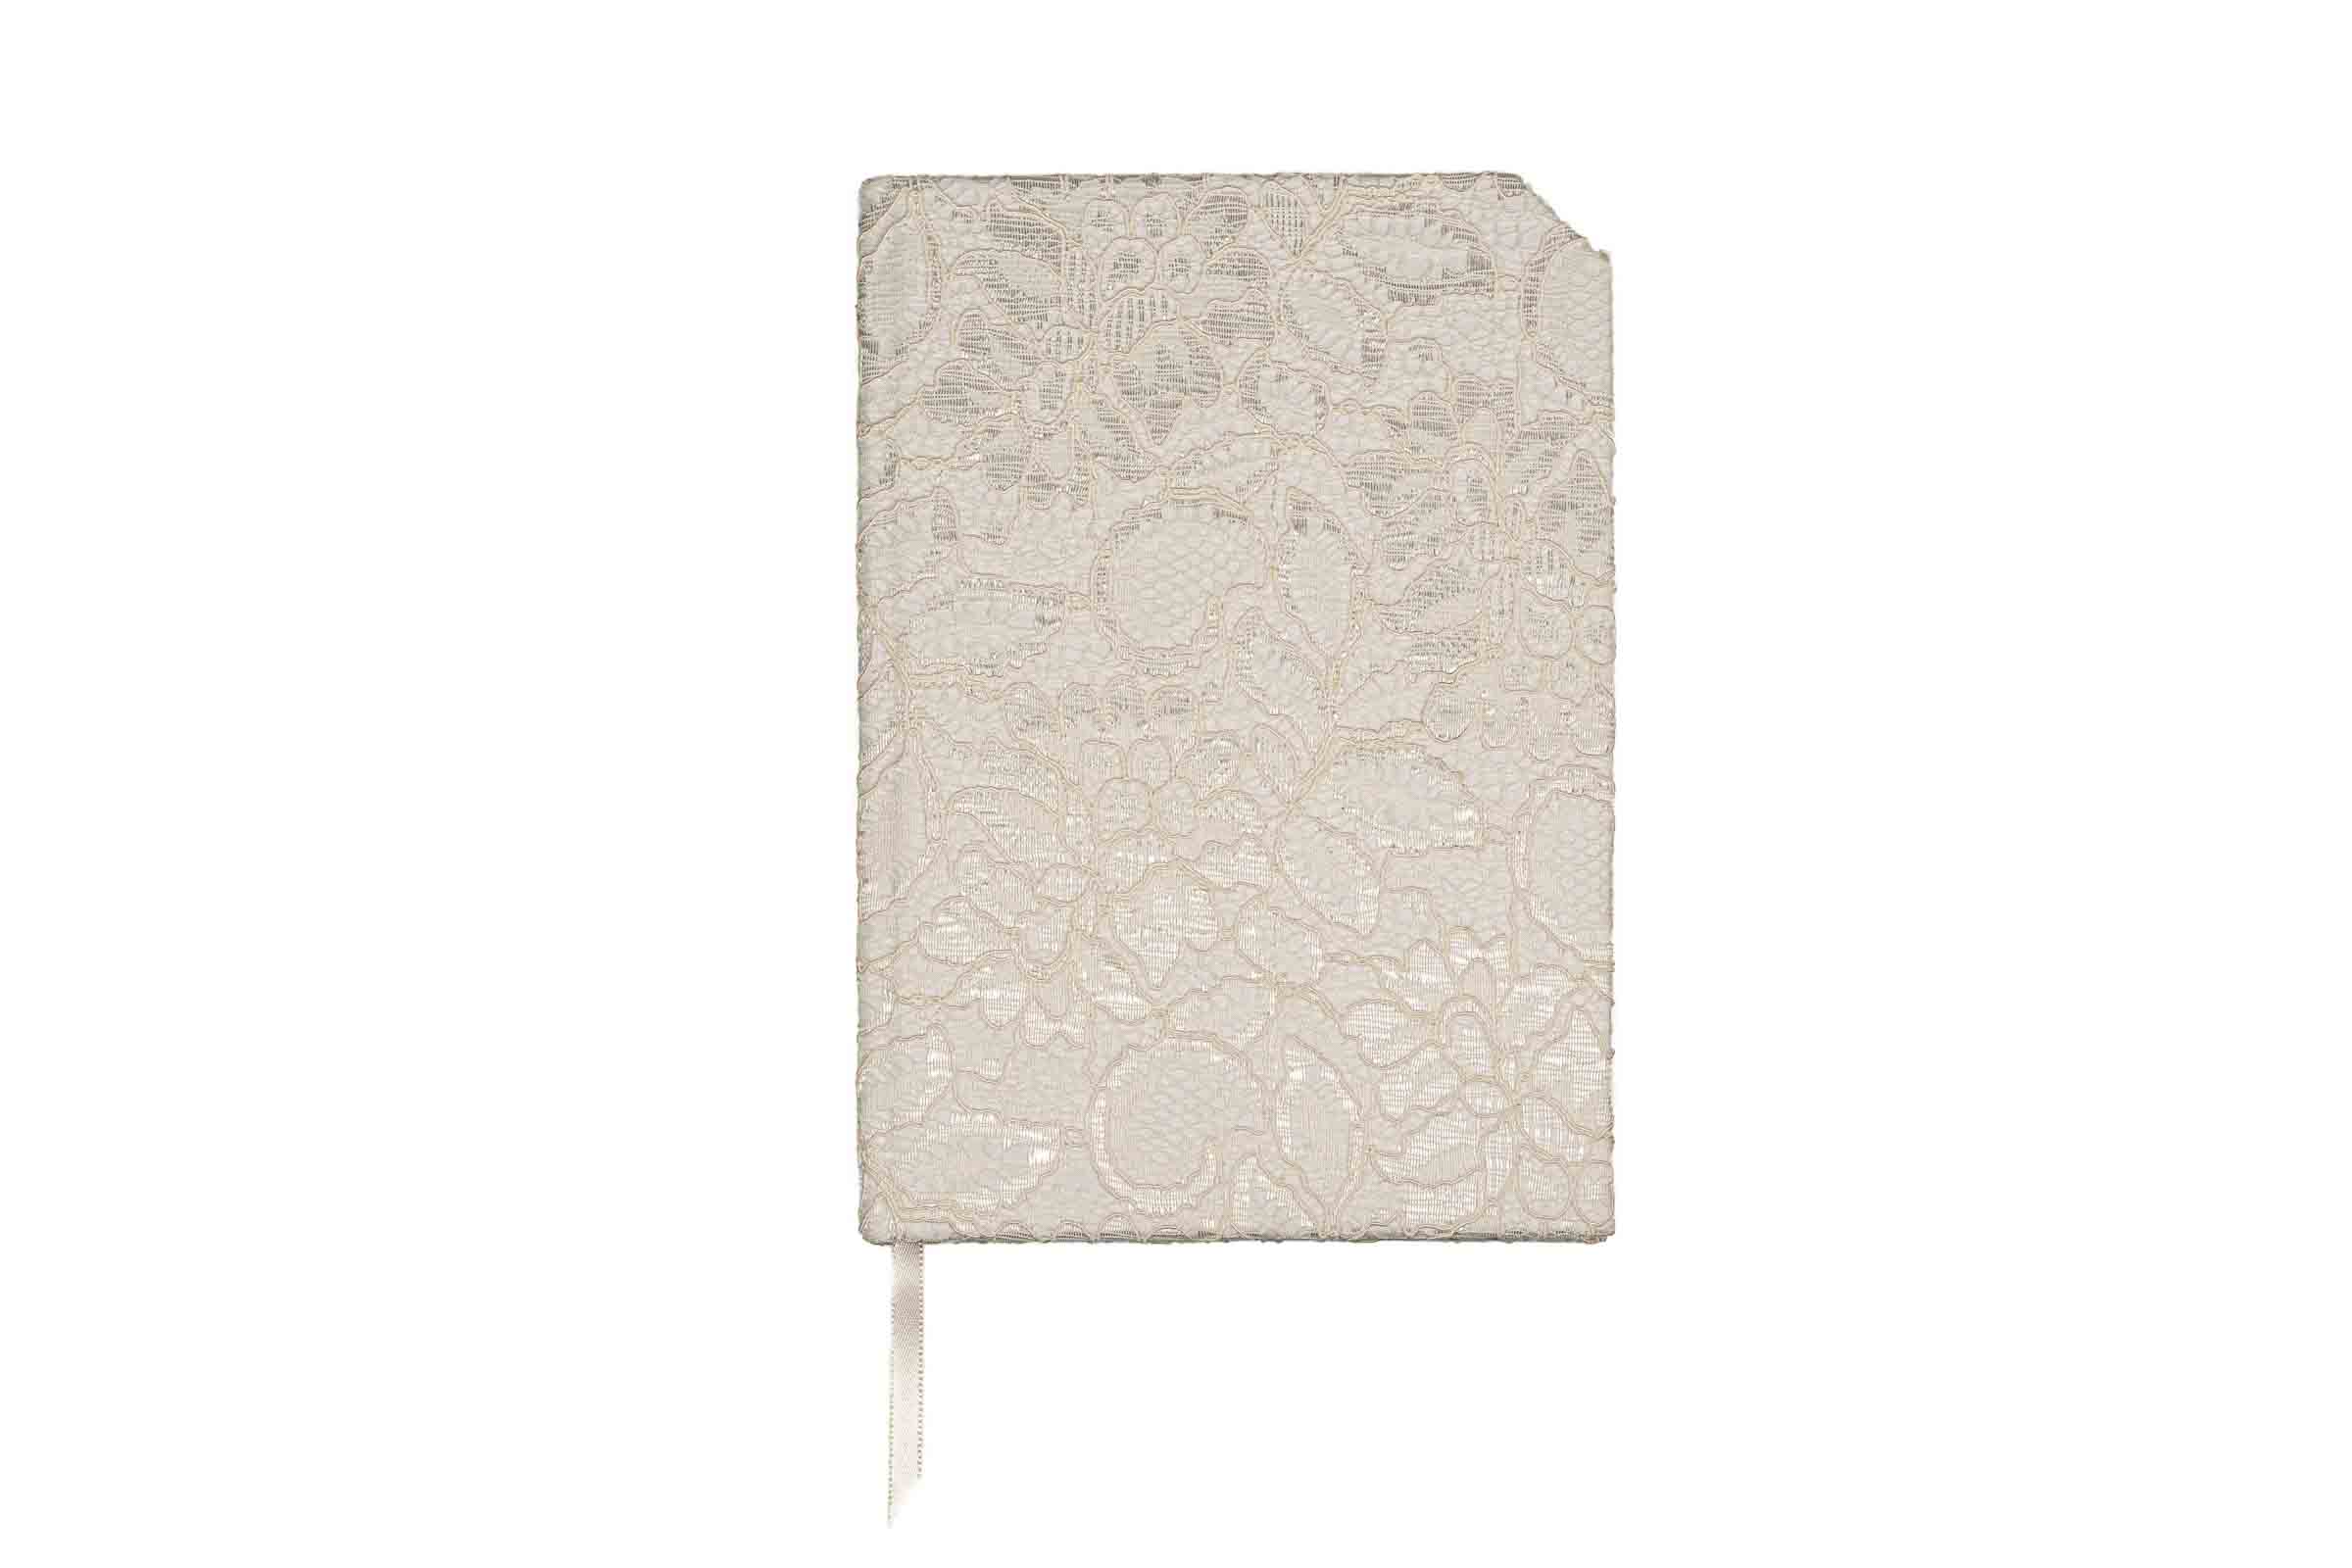 Sustainable A5 Classic Journal White Lace